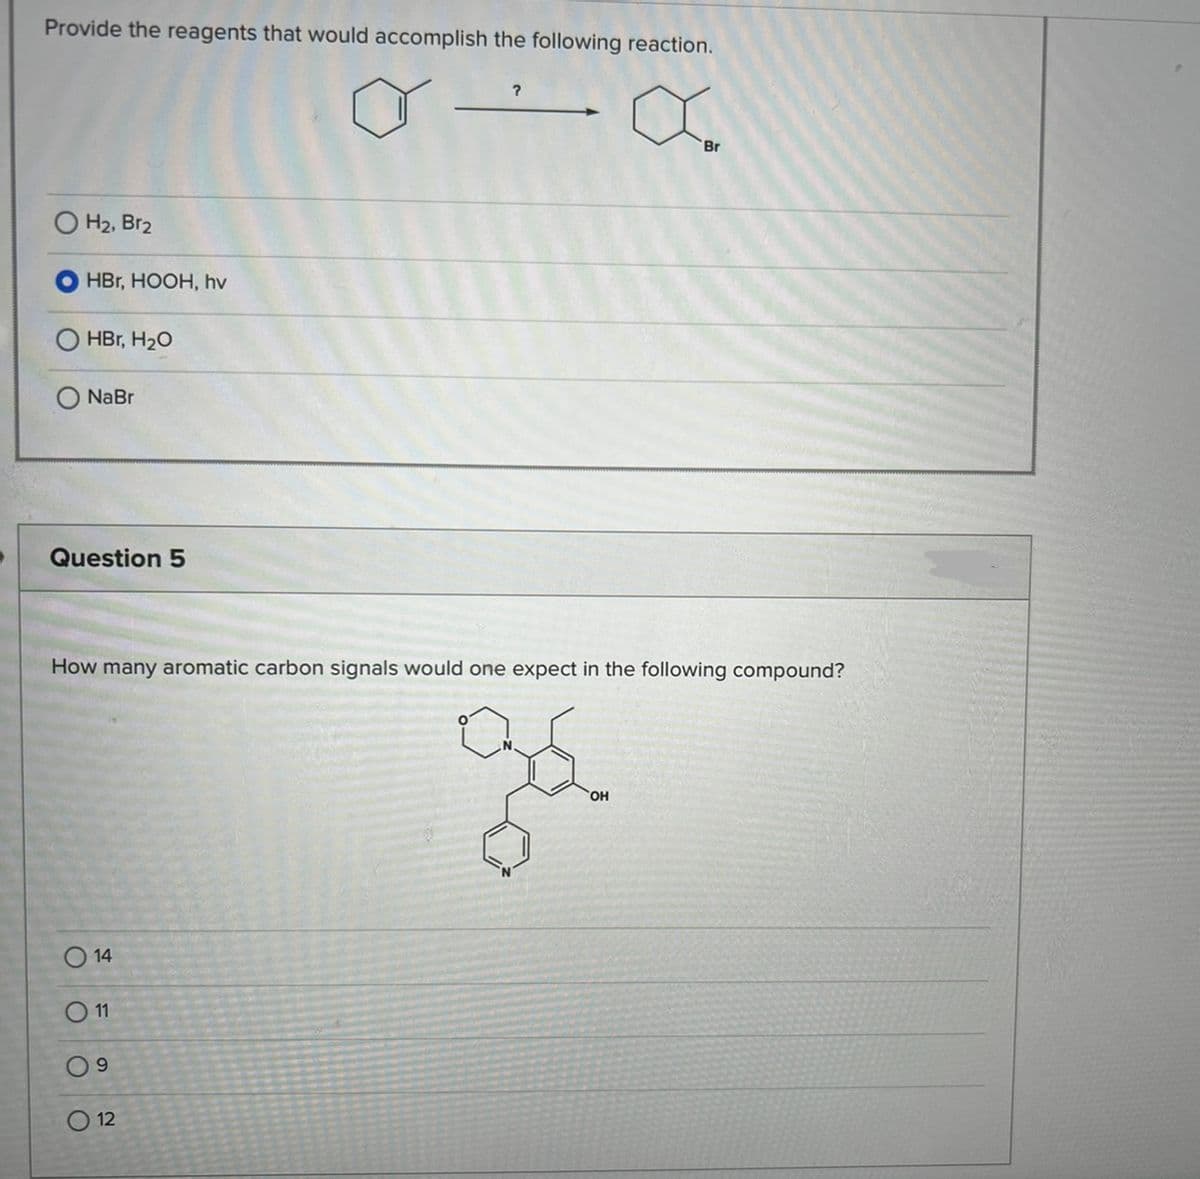 Provide the reagents that would accomplish the following reaction.
OH₂, Br₂
HBr, HOOH, hv
HBr, H₂O
NaBr
Question 5
014
0 11
09
?
How many aromatic carbon signals would one expect in the following compound?
ge
12
Br
OH